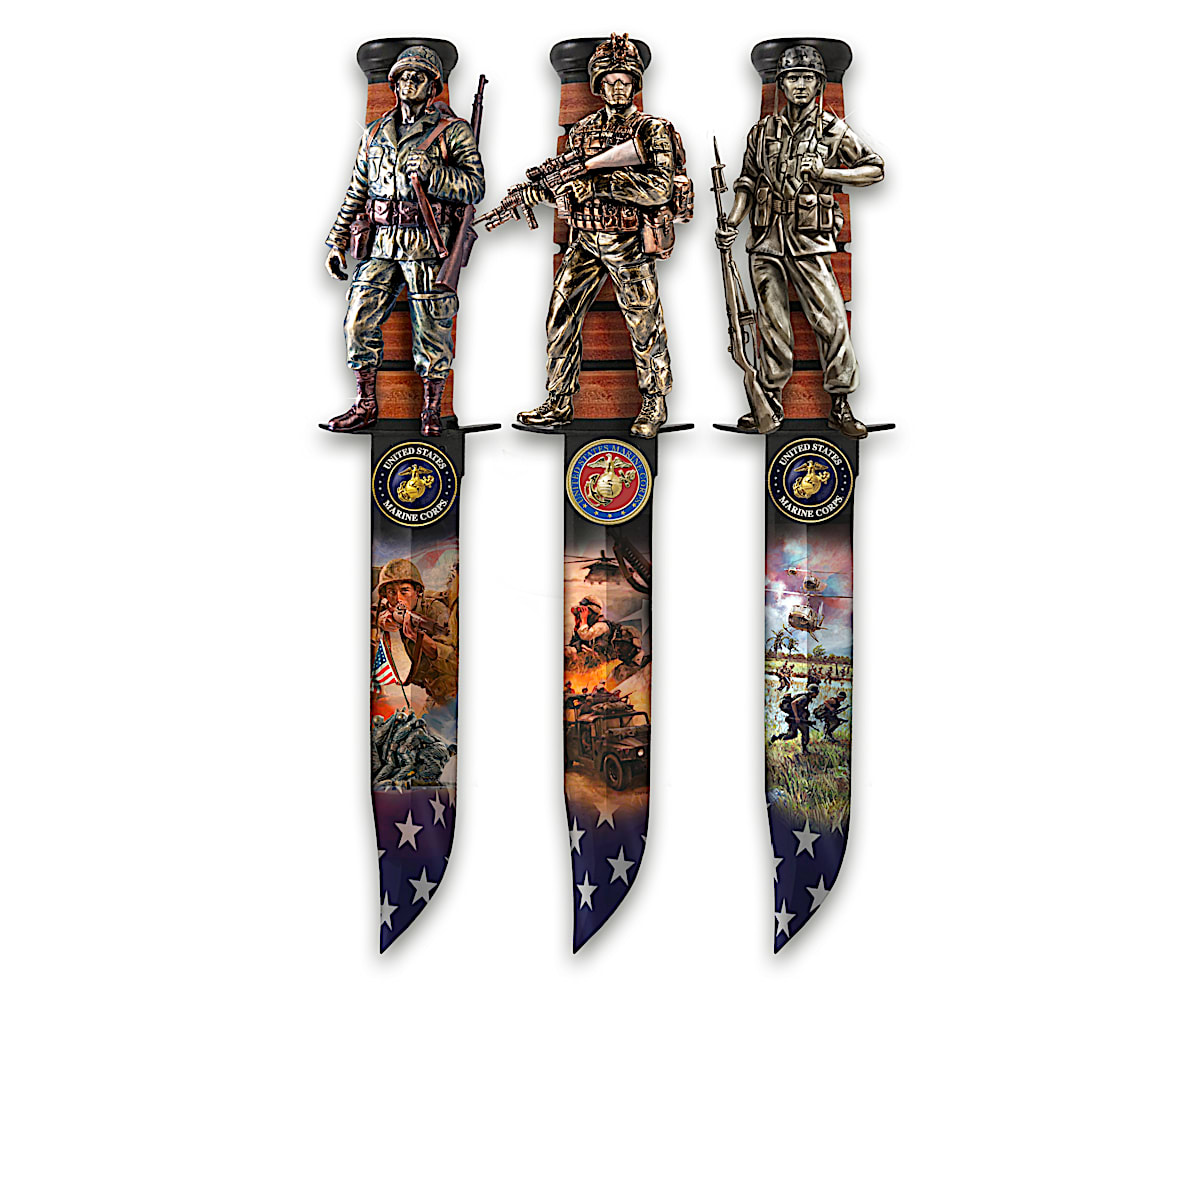 USMC Knife Wall Decor Collection with James Griffin Art